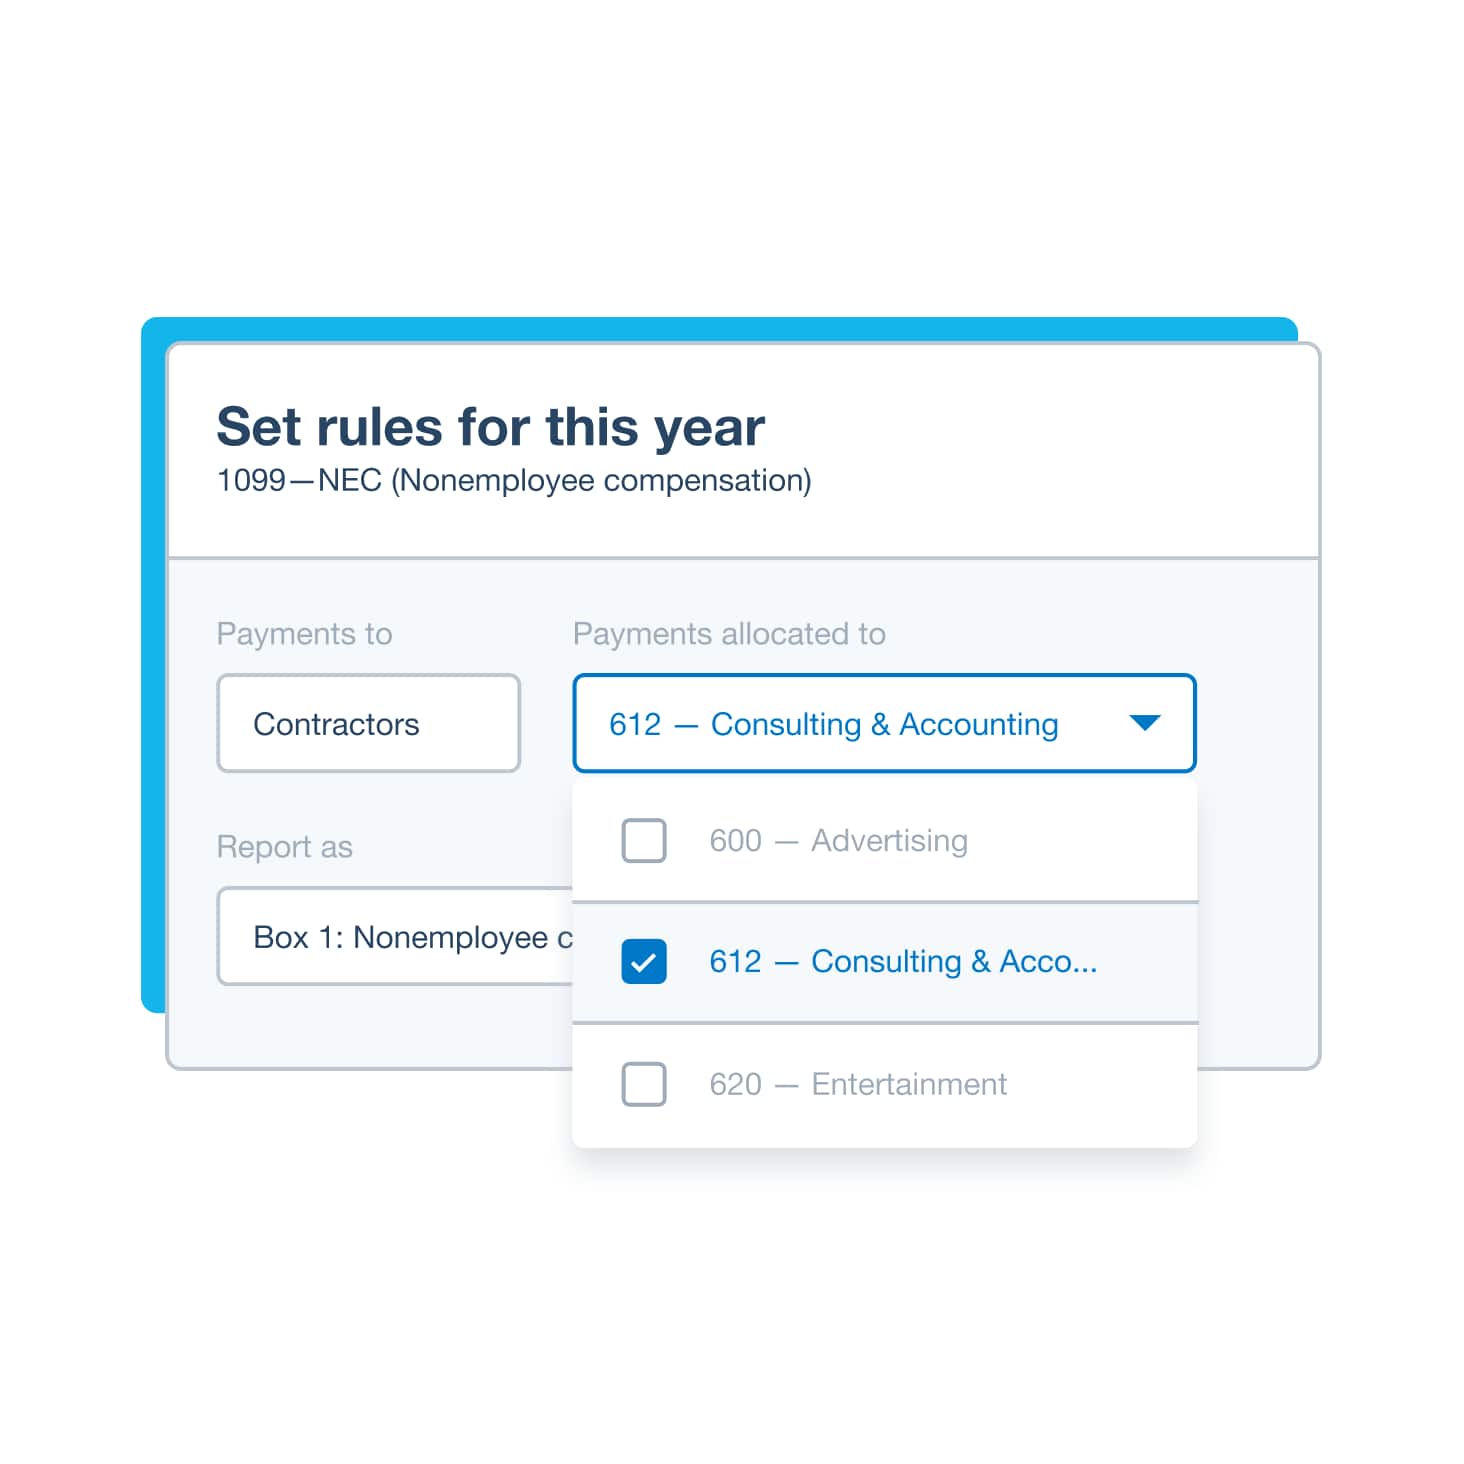 The ‘Set rules for this year’ screen lets you choose the account code for payments included in your 1099 report.